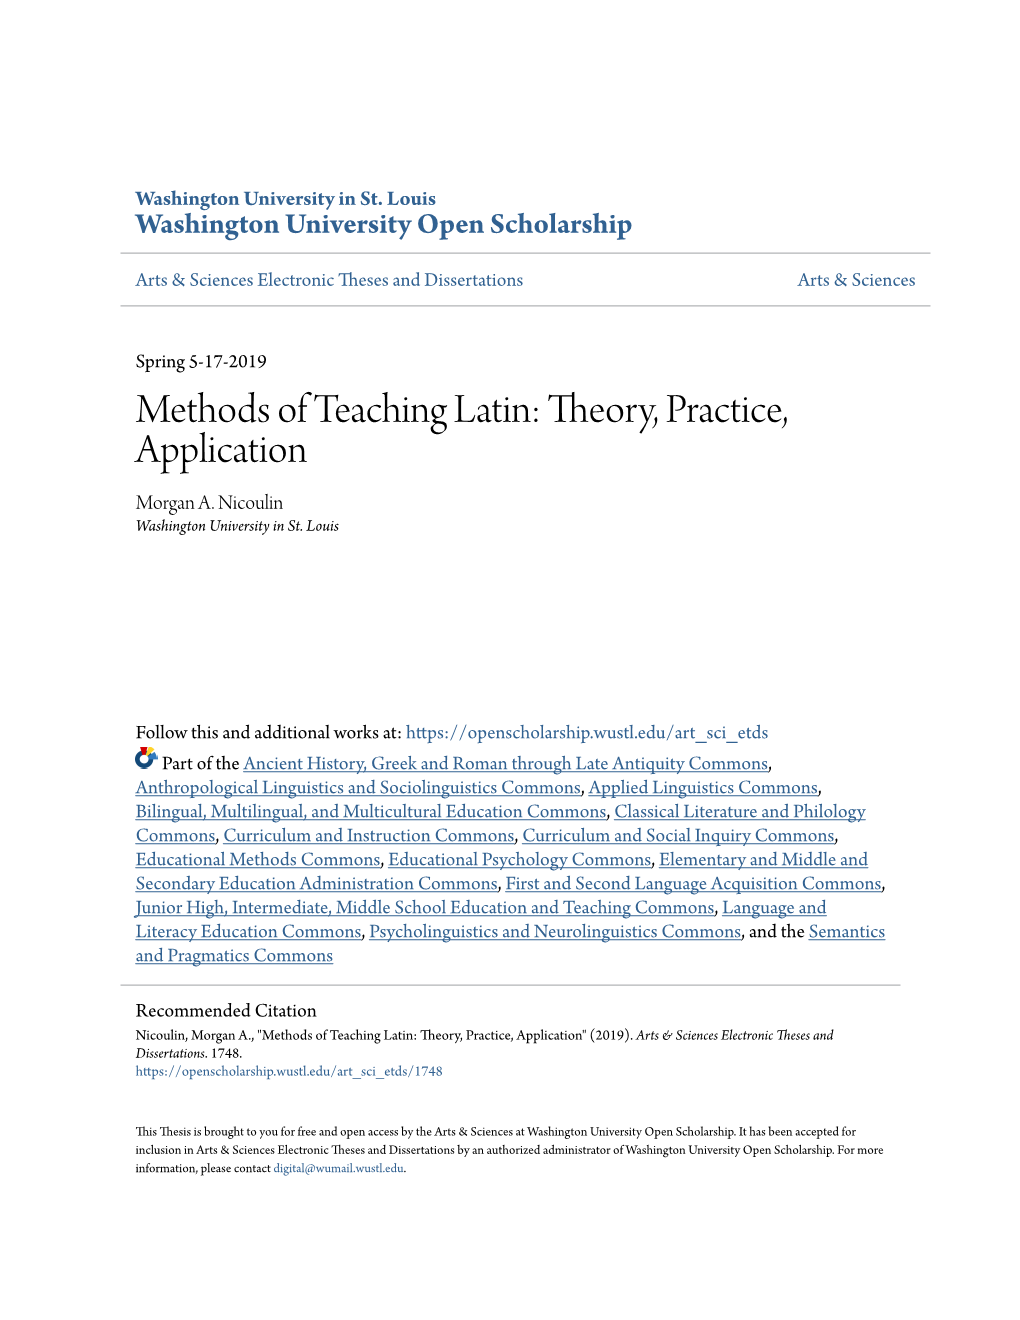 Methods of Teaching Latin: Theory, Practice, Application Morgan A